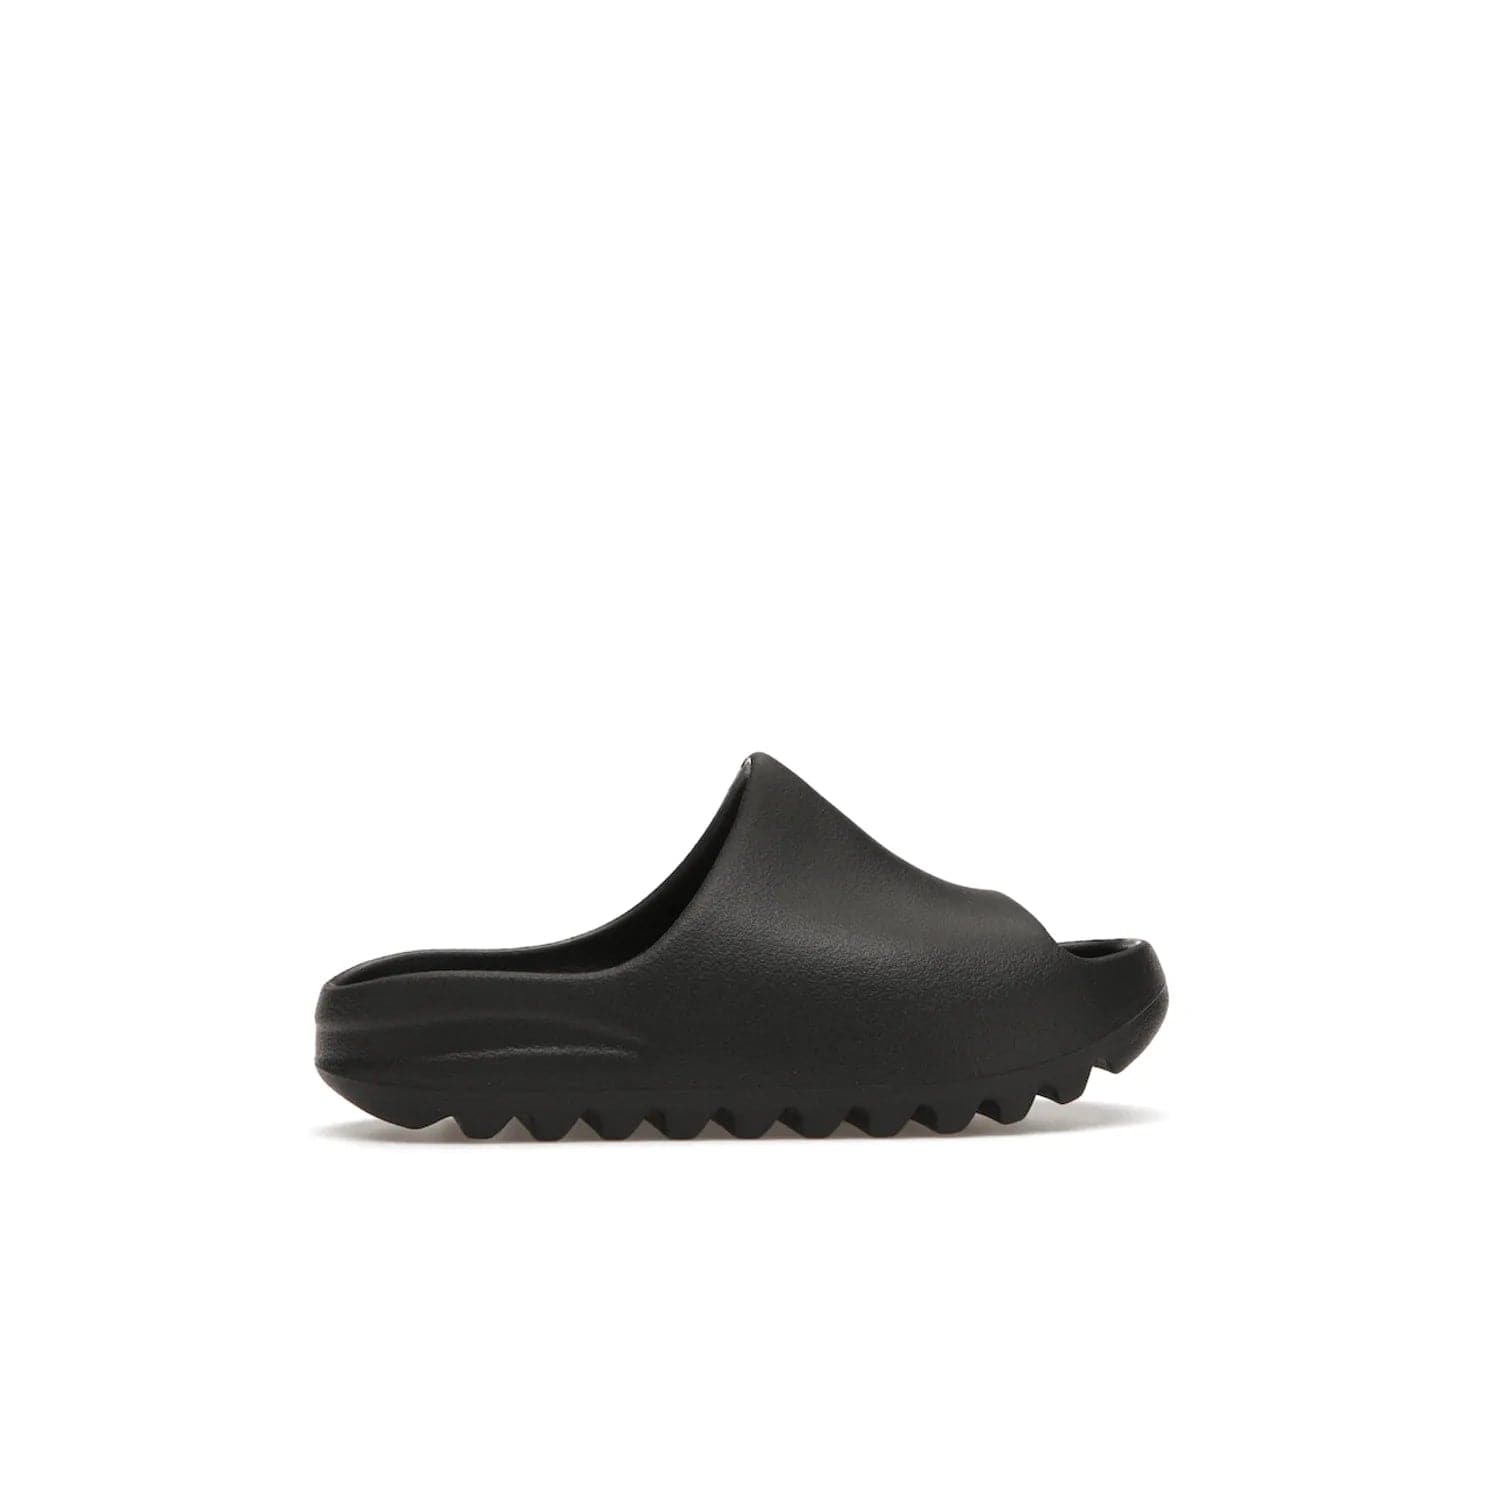 adidas Yeezy Slide Onyx (Kids) - Image 36 - Only at www.BallersClubKickz.com - adidas Yeezy Slide Onyx (Kids): Comfortable foam construction with textured surface and iconic three-stripe logo. Breathable, open-toe design and deep grooves for traction. Released in March 2021 at $50.